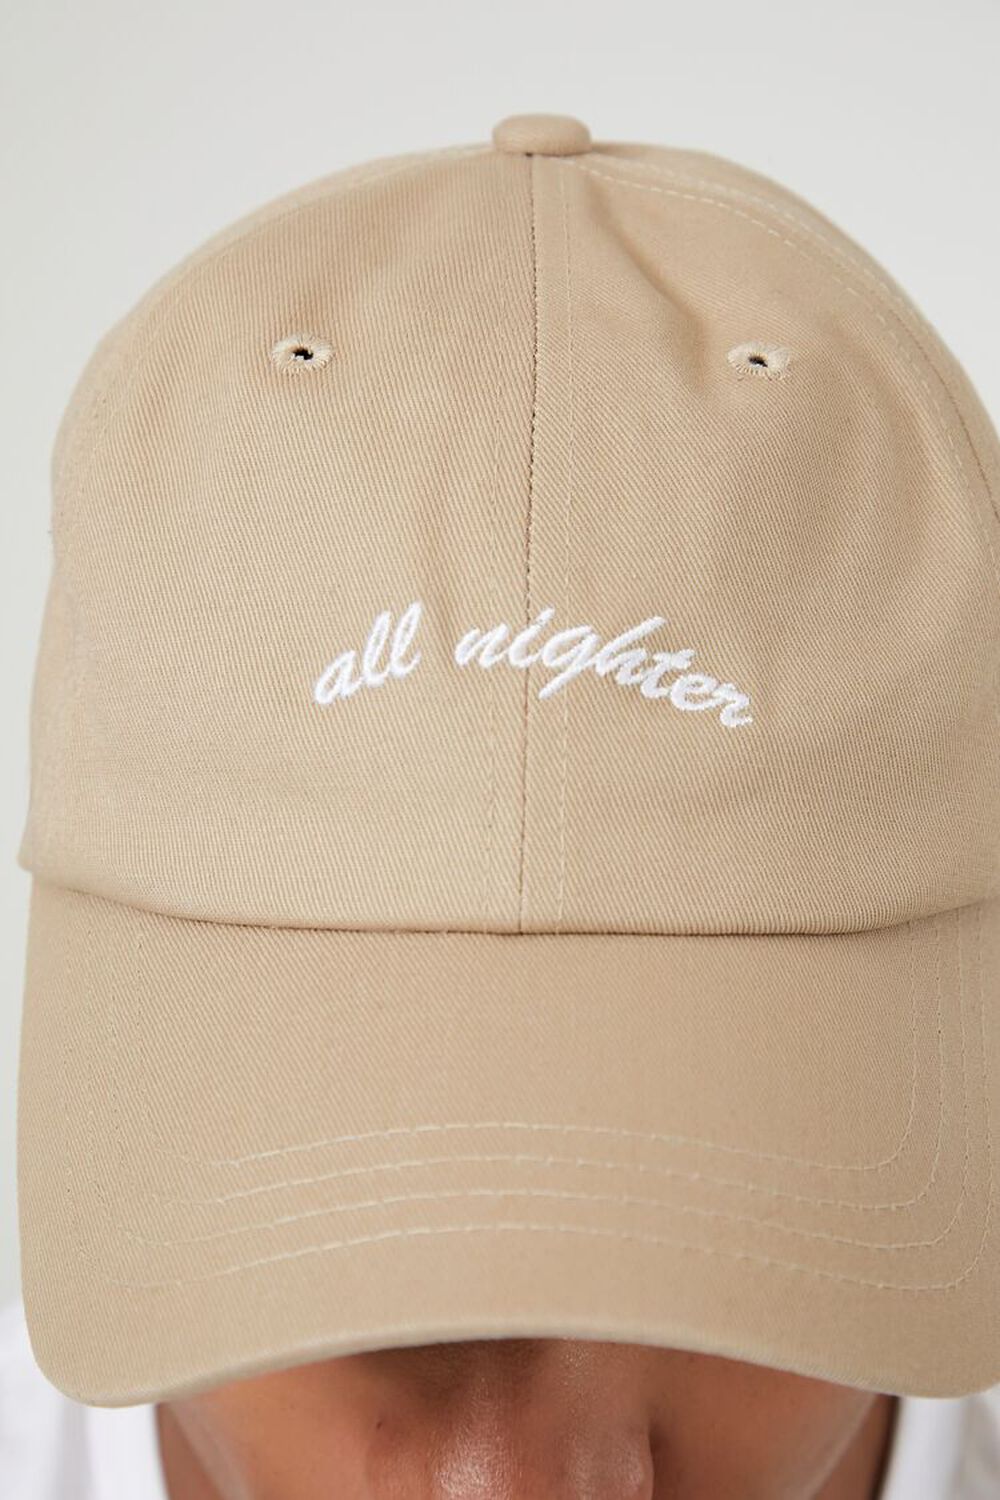 All Nighter Embroidered Dad Cap, image 3